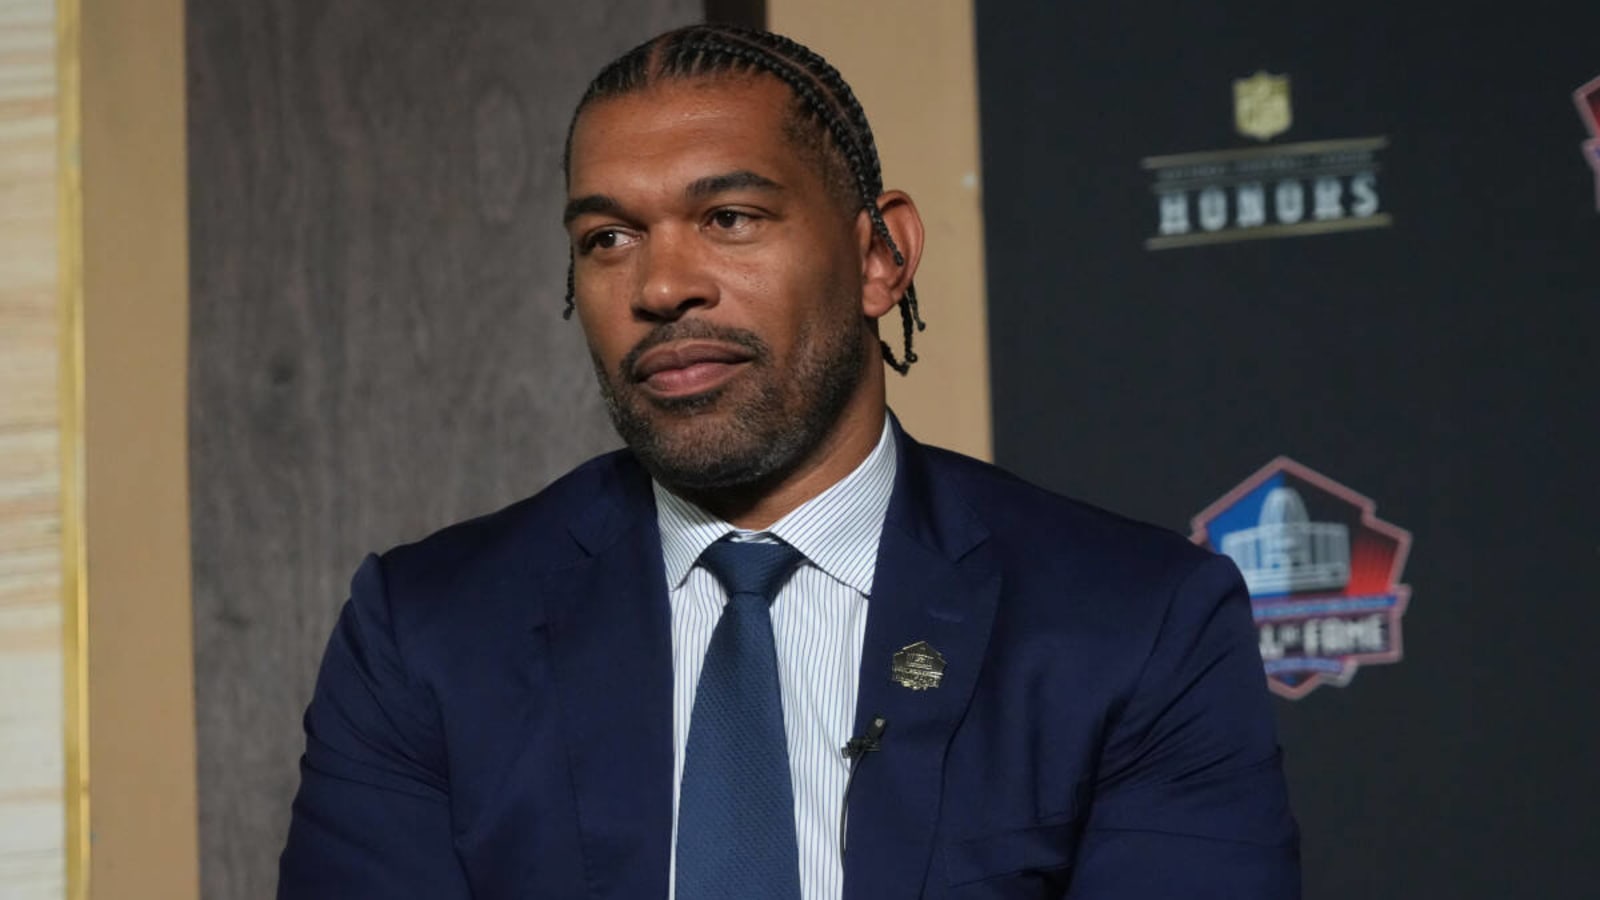 Julius Peppers, a Panthers franchise legend, got everything he deserved at NFL Honors